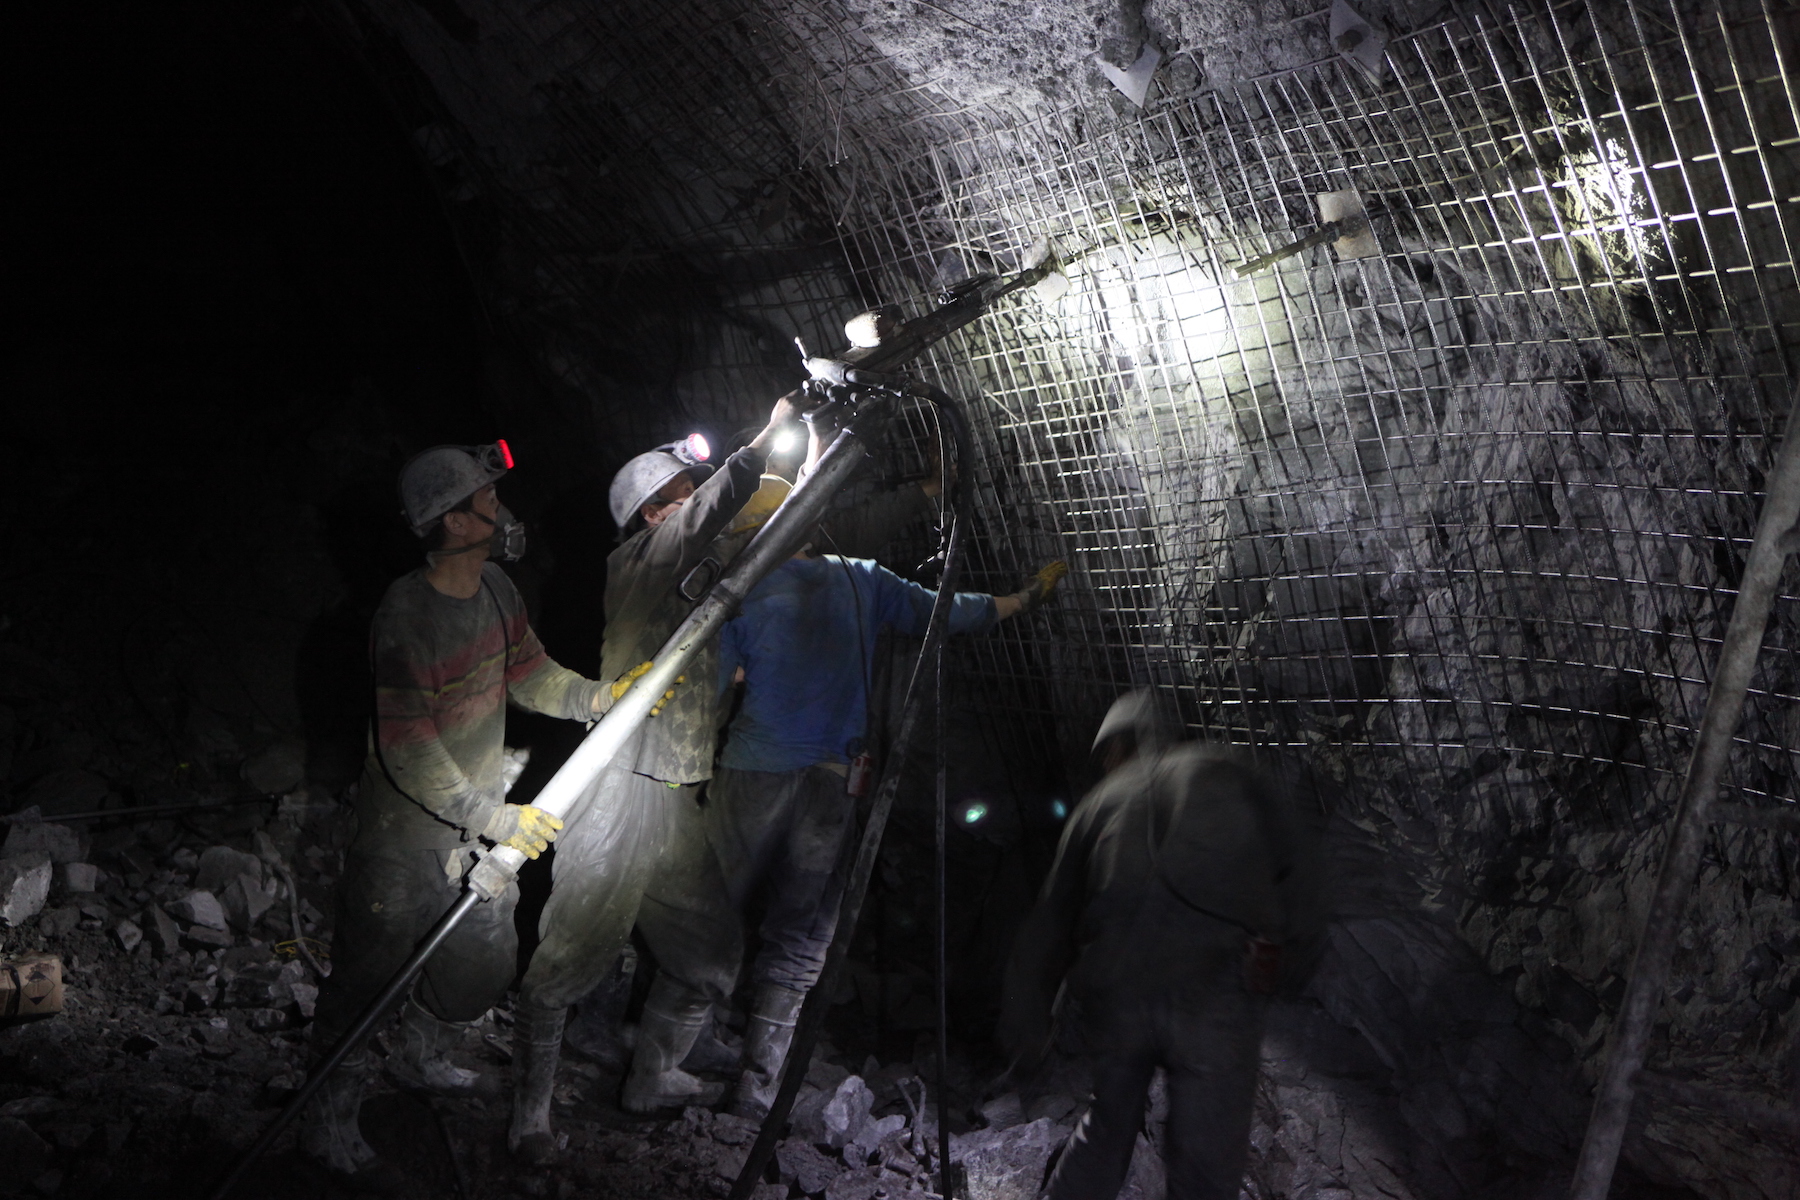 Coal miners conduct work underground in a mine